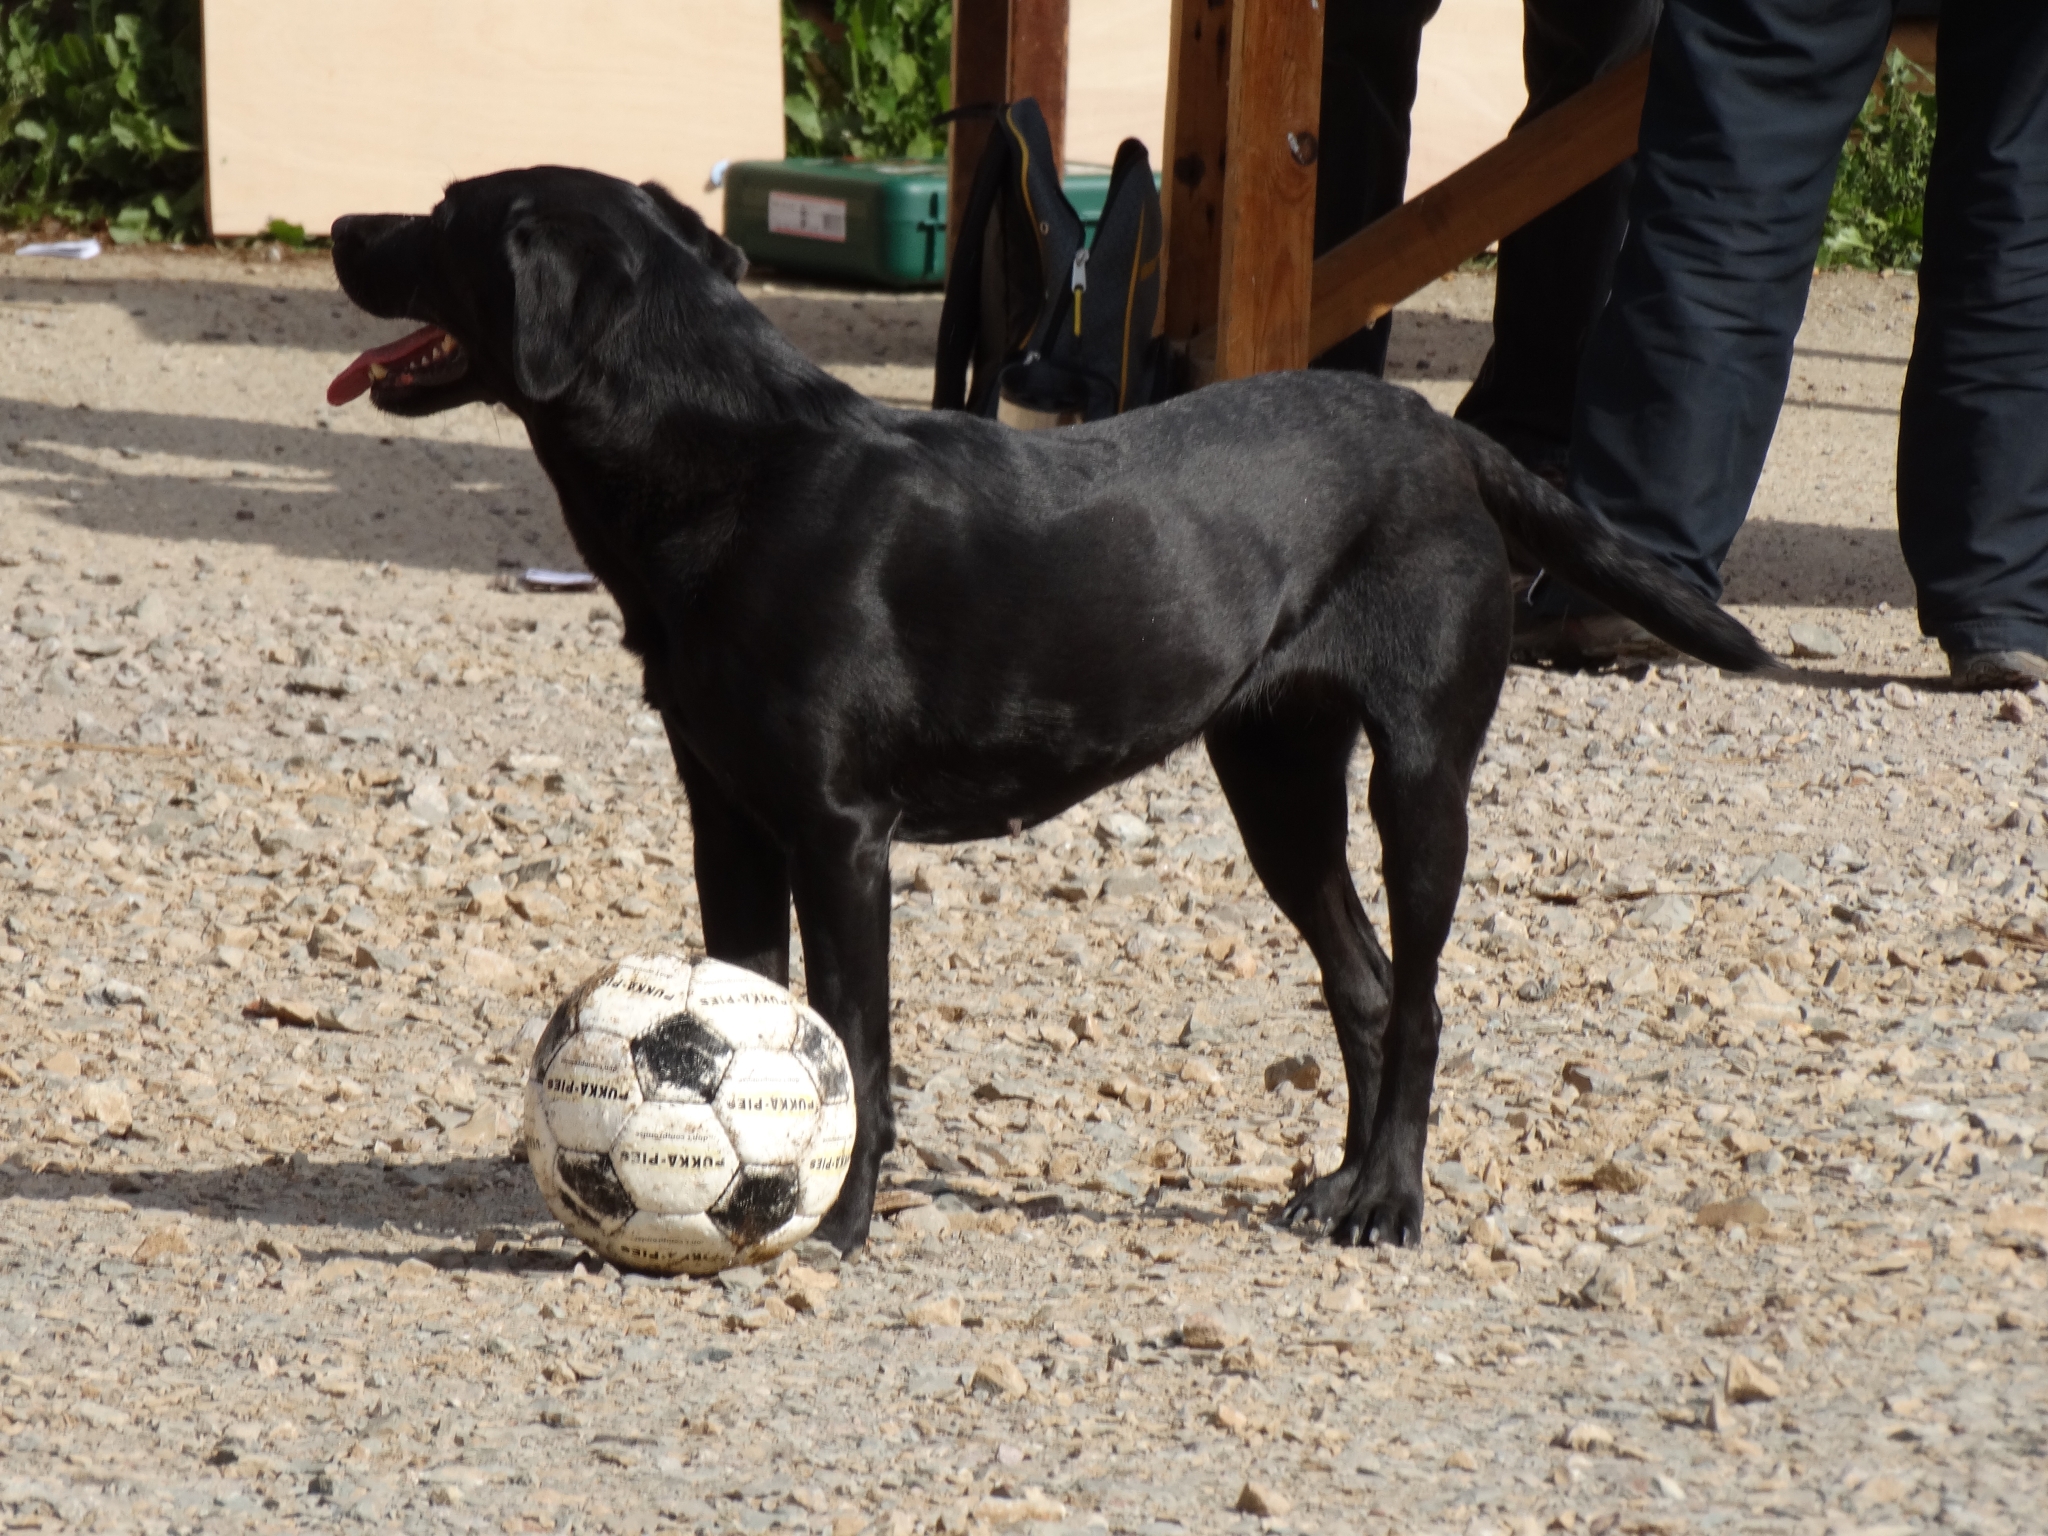 A photo from the FoTF Conservation Event - April 2019 - Mink Raft Construction at Santon Downham Workshops : A dog guards his football